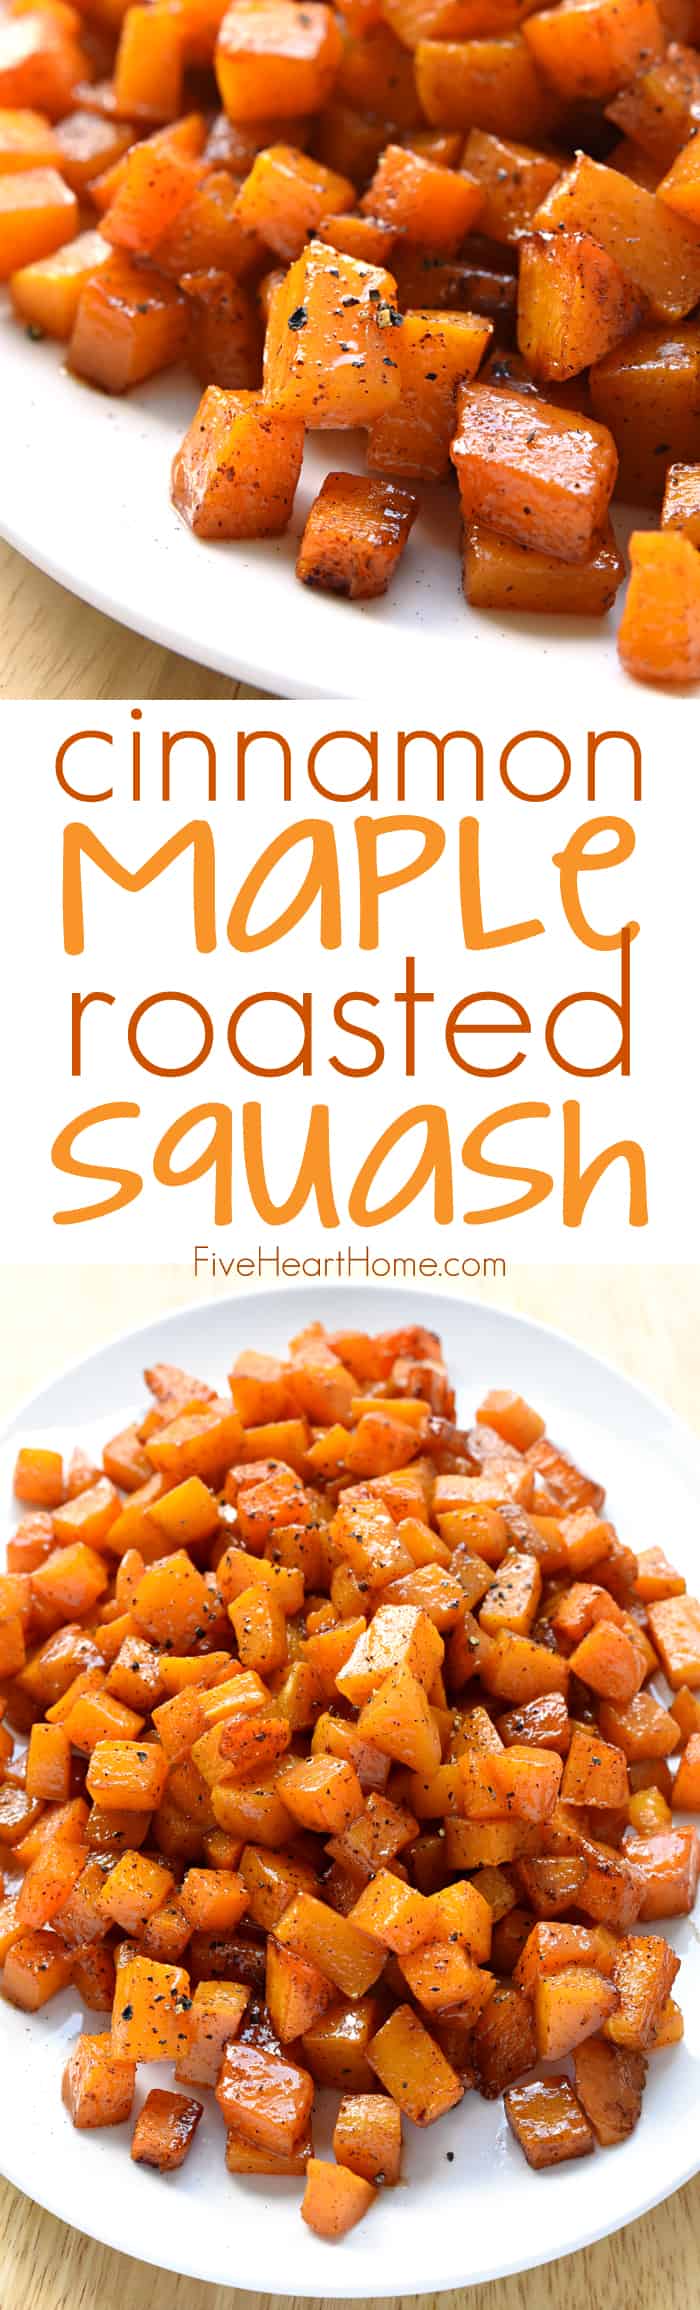 Roasted Butternut Squash with Cinnamon + Maple is a sweet and savory recipe of tender roasted squash coated with coconut oil, maple syrup, and cinnamon for a gorgeous, golden fall or winter side dish! | FiveHeartHome.com via @fivehearthome